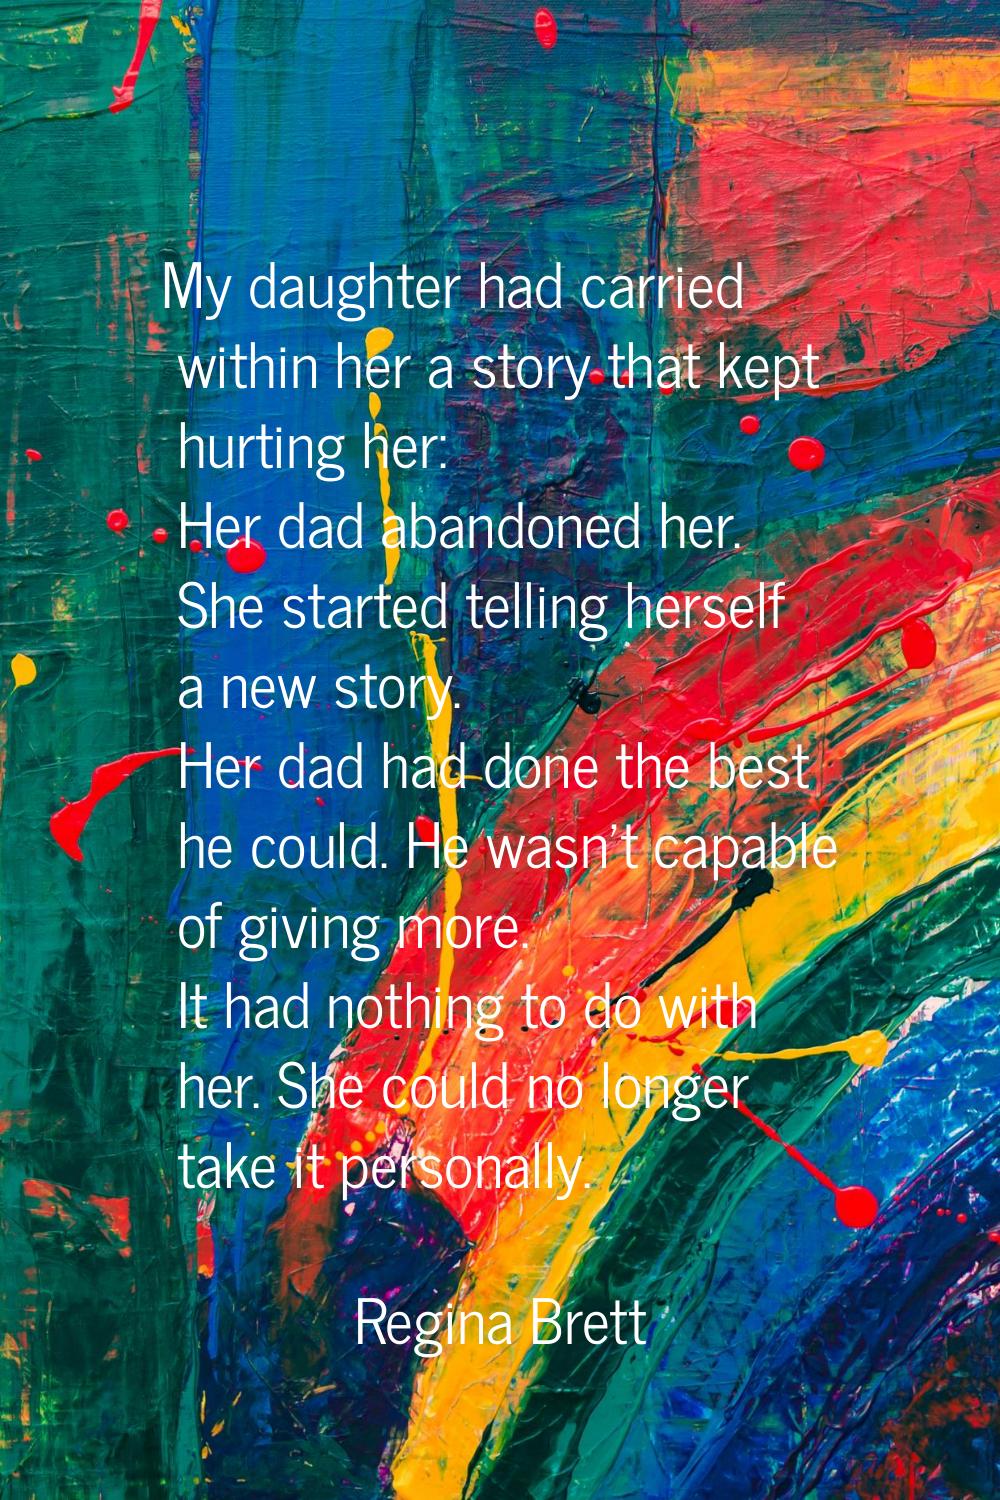 My daughter had carried within her a story that kept hurting her: Her dad abandoned her. She starte